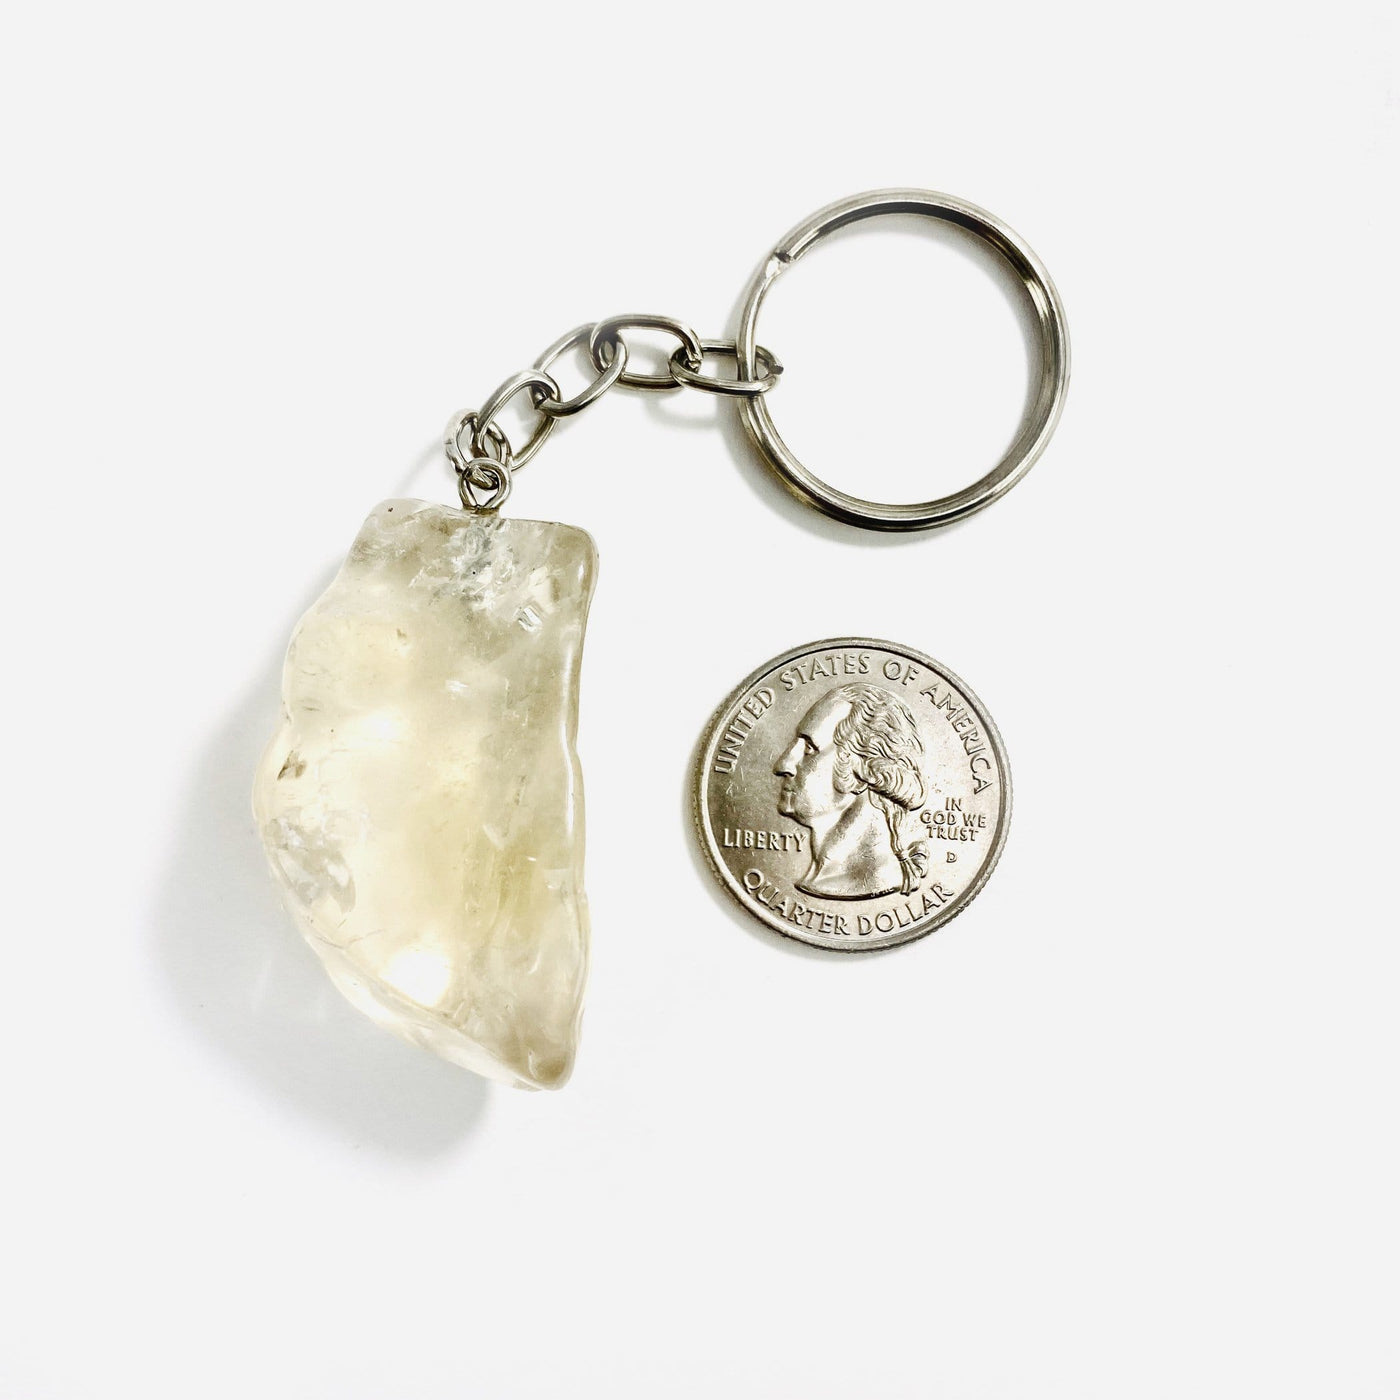 One citrine keychain on a white background next to a quarter showing the stone is a little bigger than the quarter.